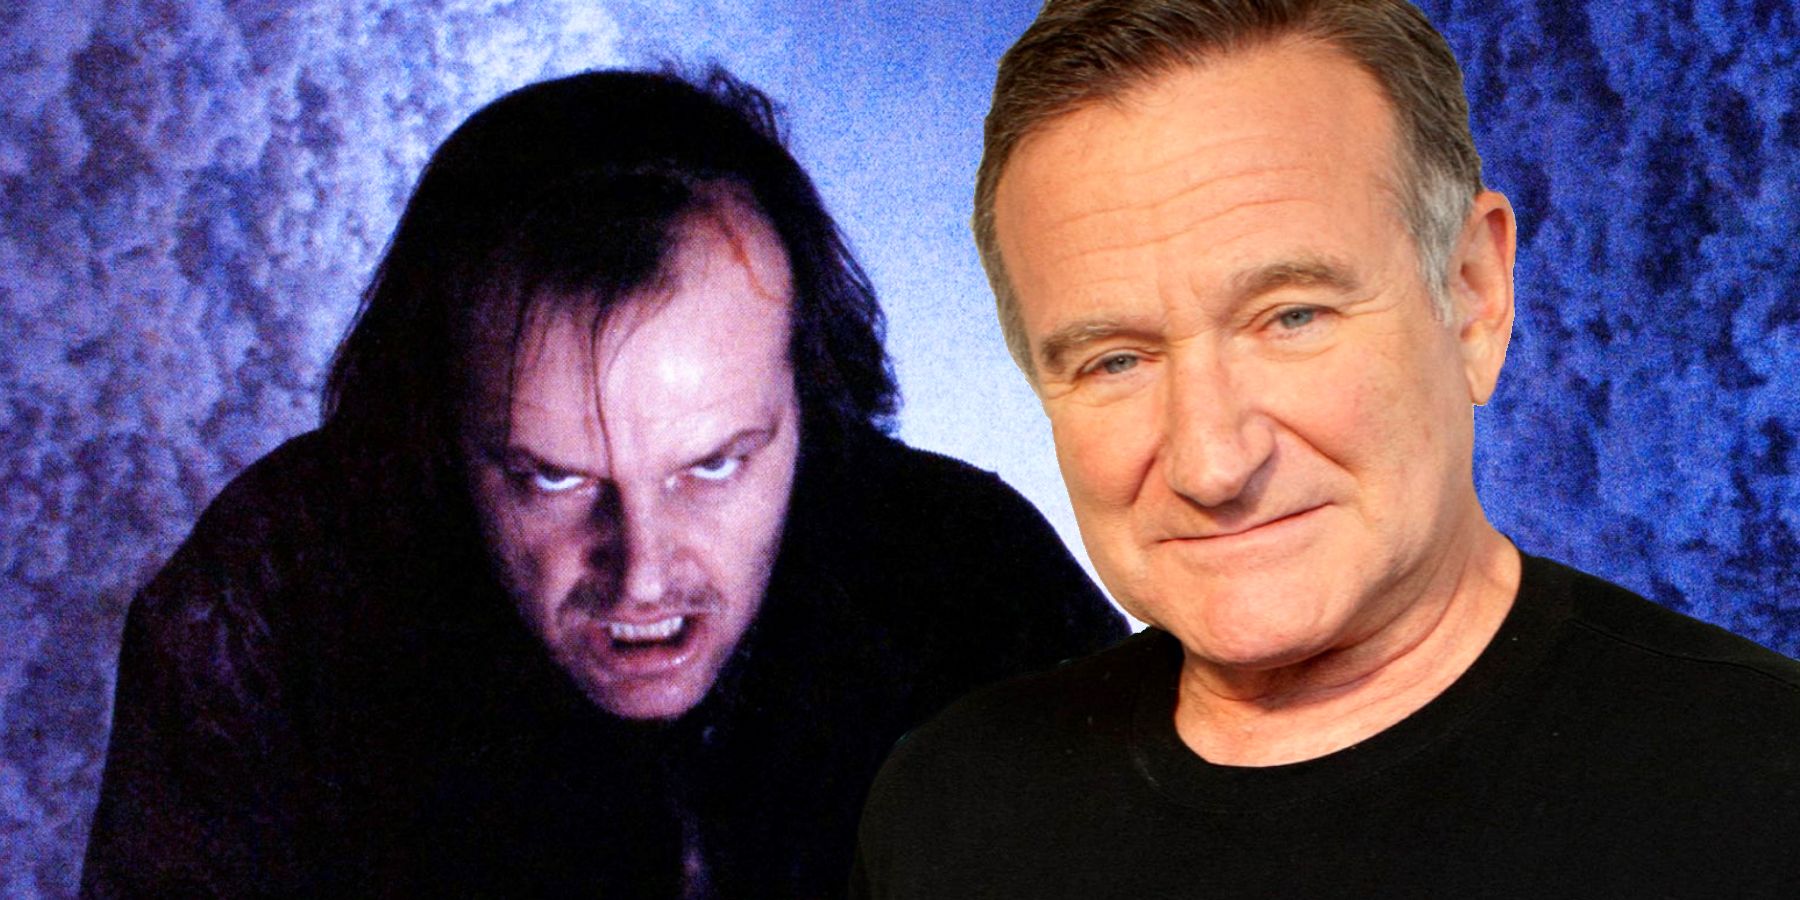 What If Robin Williams Starred In The Shining Instead Of Jack Nicholson?